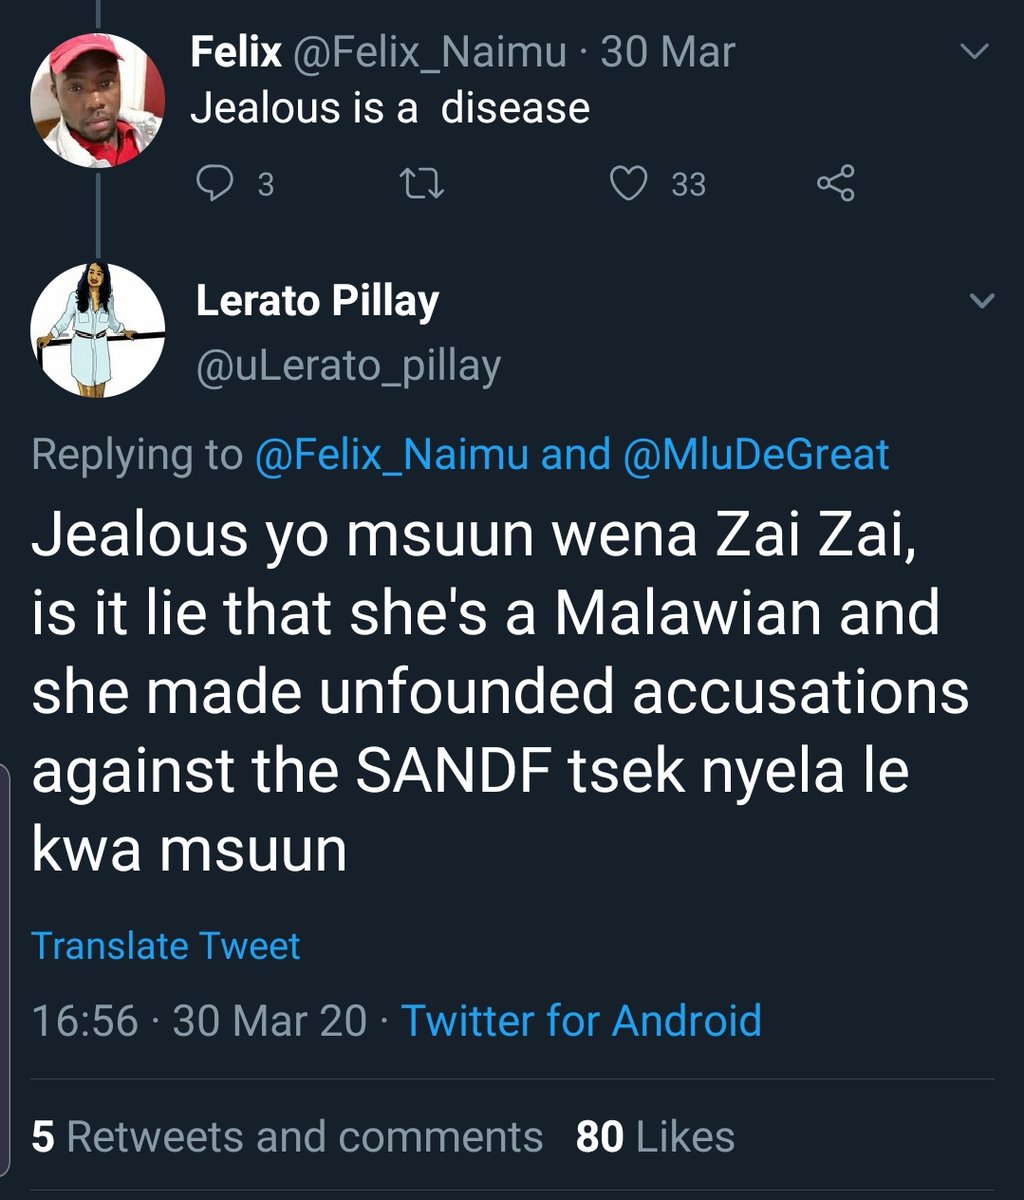 He has also previously fomented sentiments against  @NalediChirwa and  @zilevandamme based on their heritages.(Note the difference in tone in his earlier tweets with Van Damme)